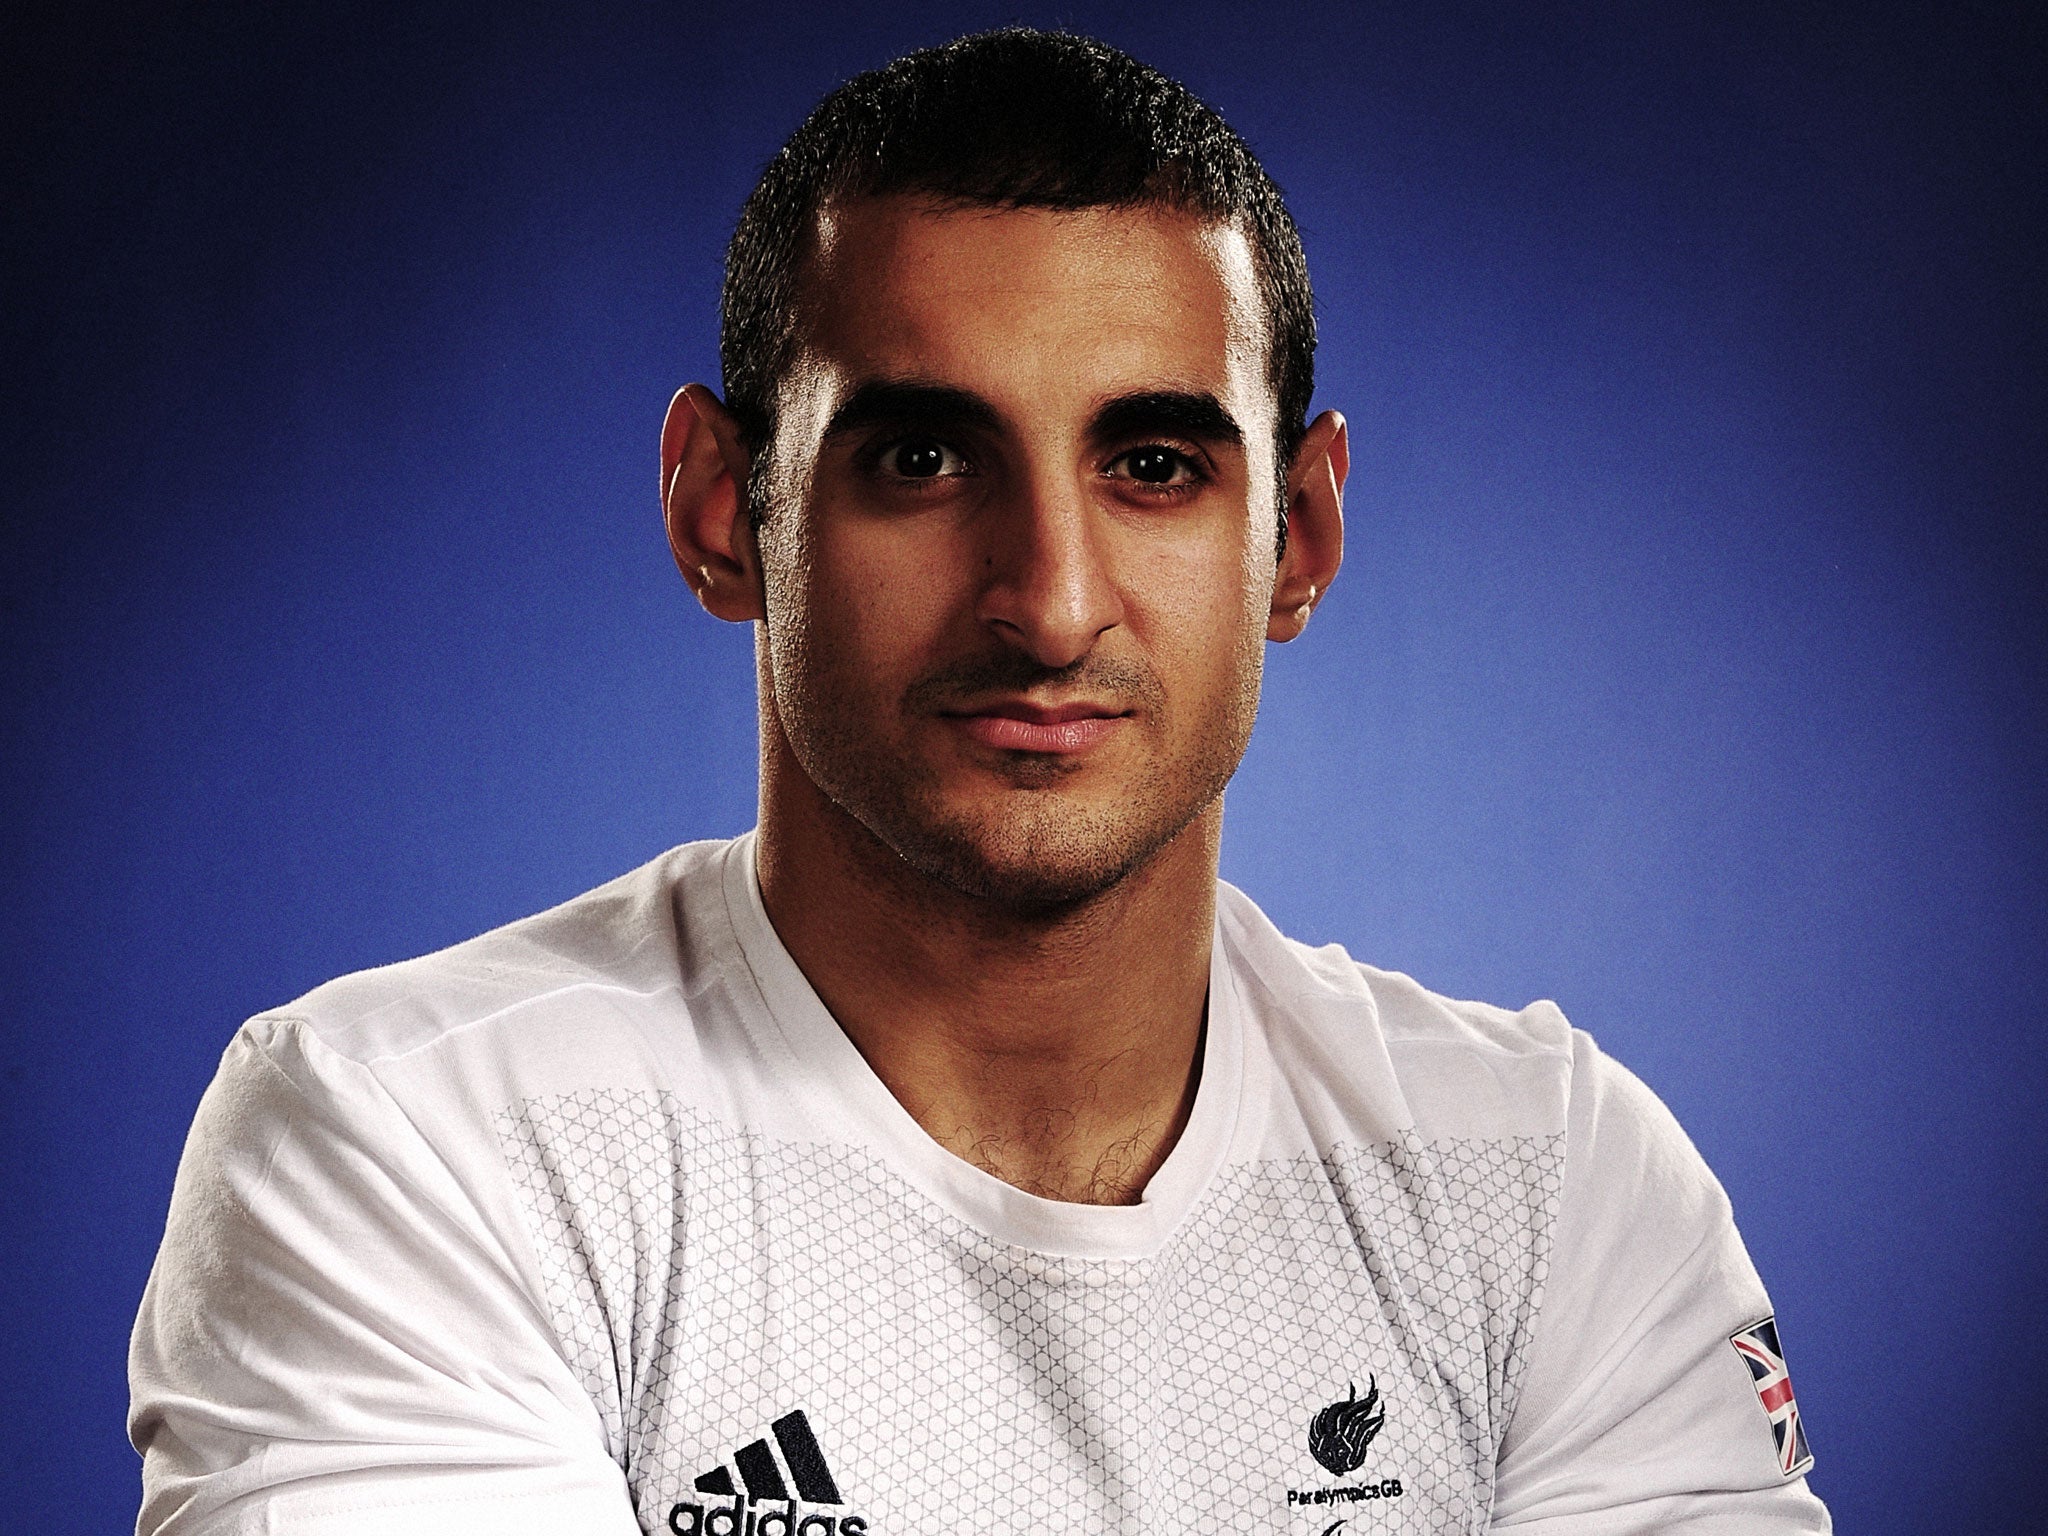 Ali Jawad pictured before the 2012 Paralympics